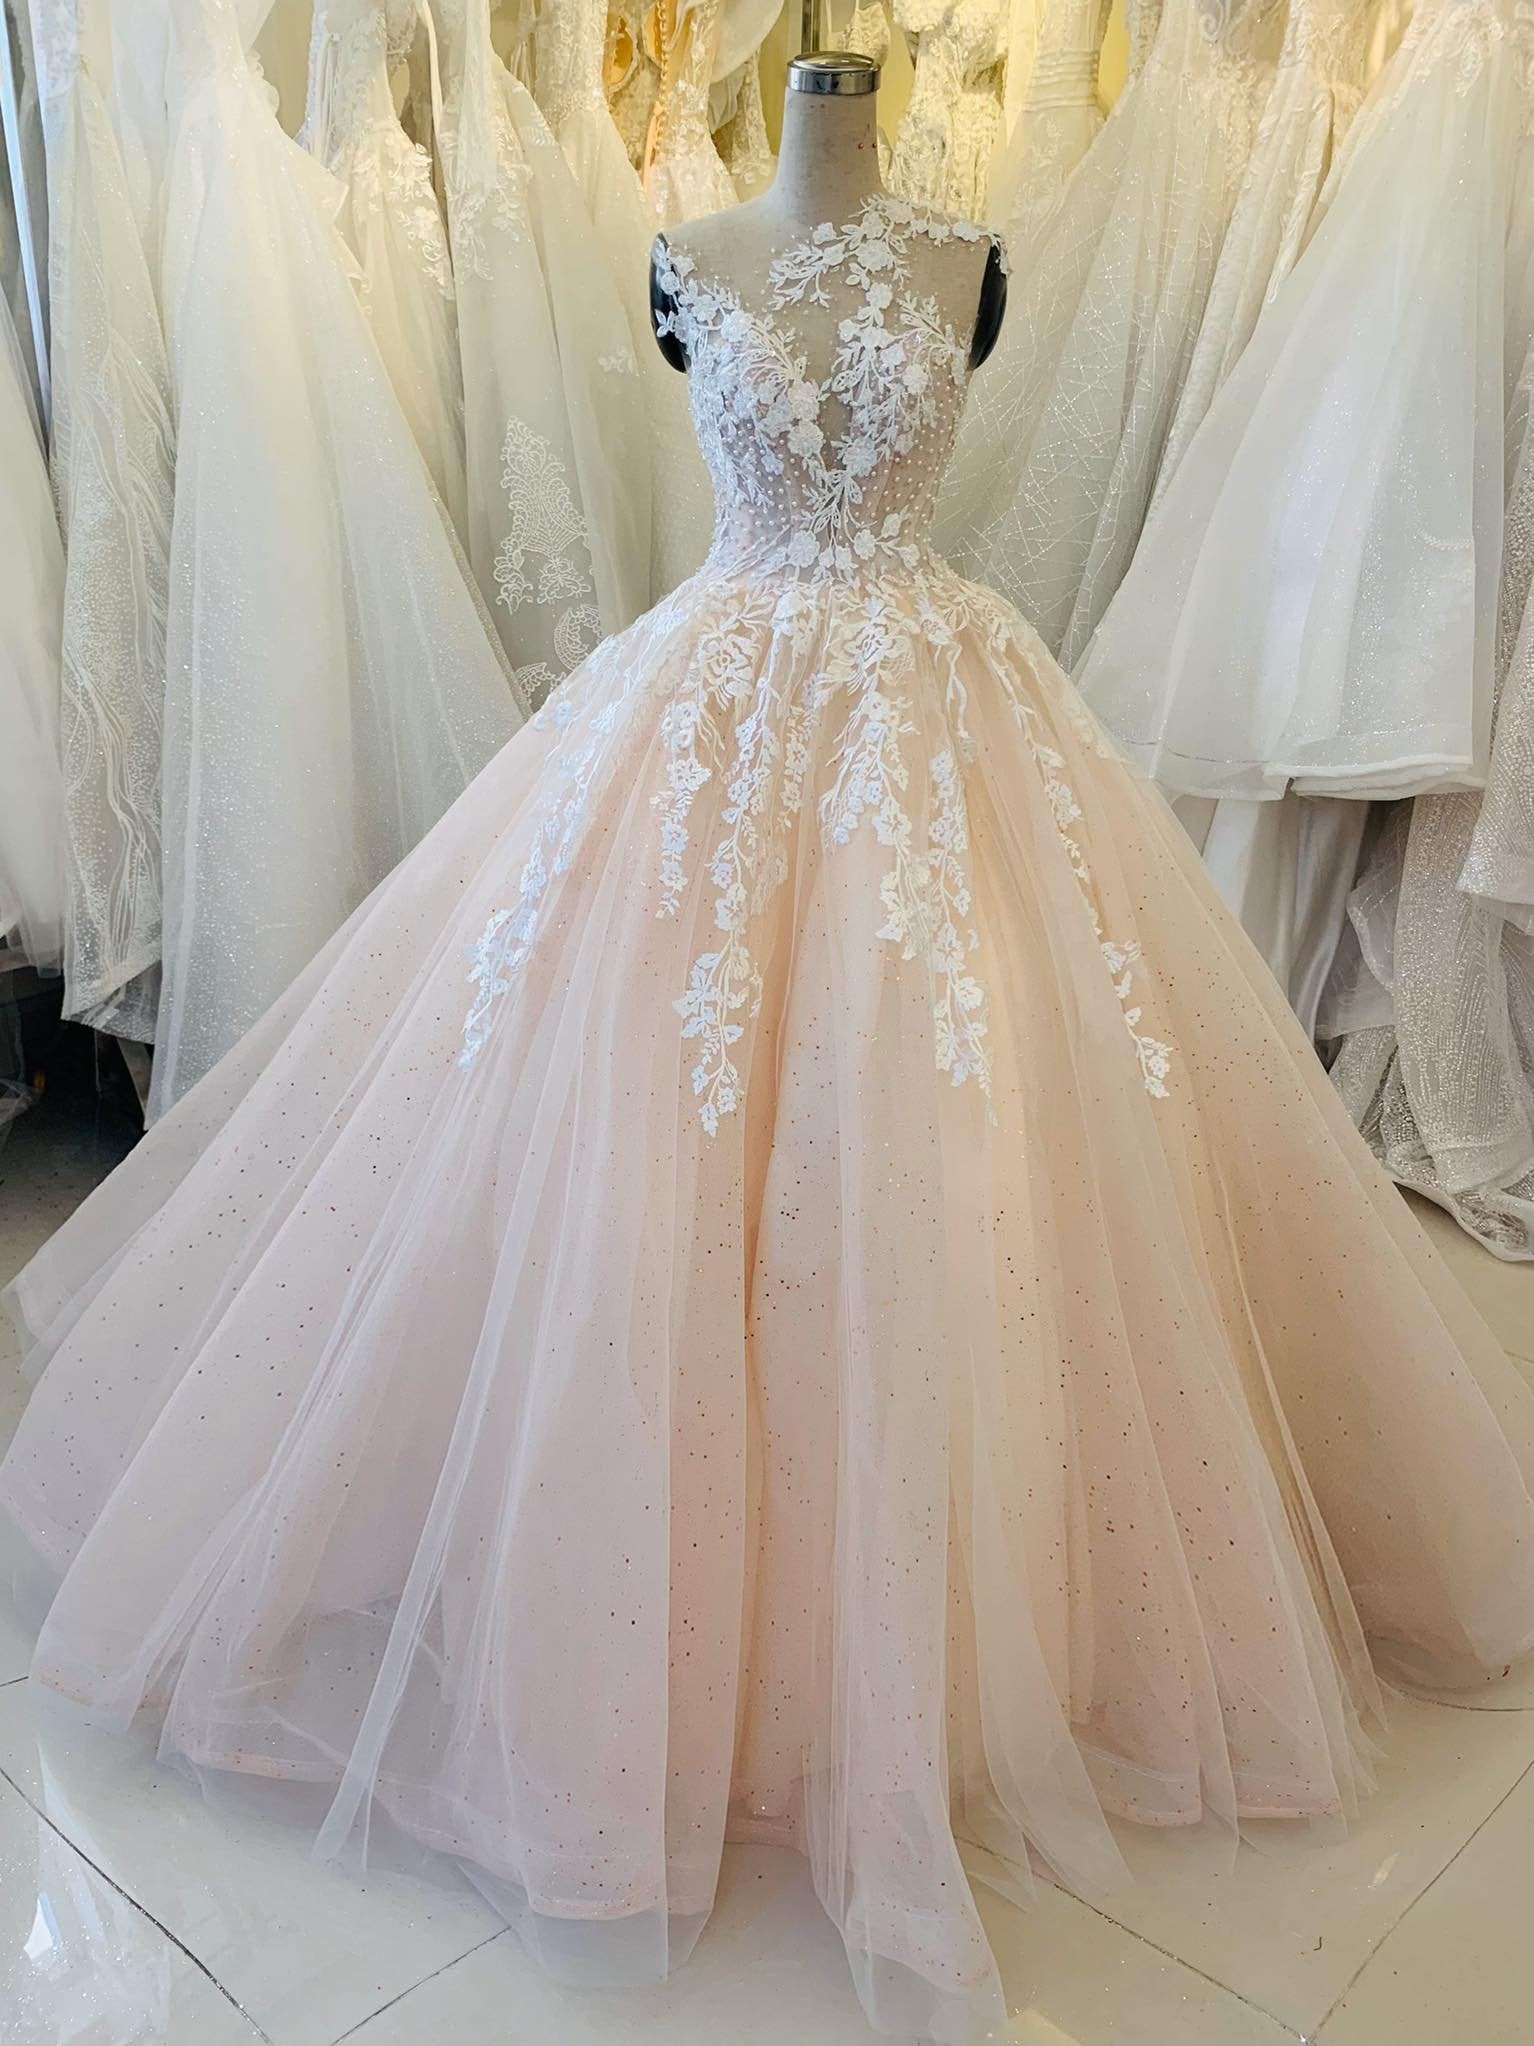 Pastel Wedding Gowns: Get Inspired by the Stars | Arabia Weddings